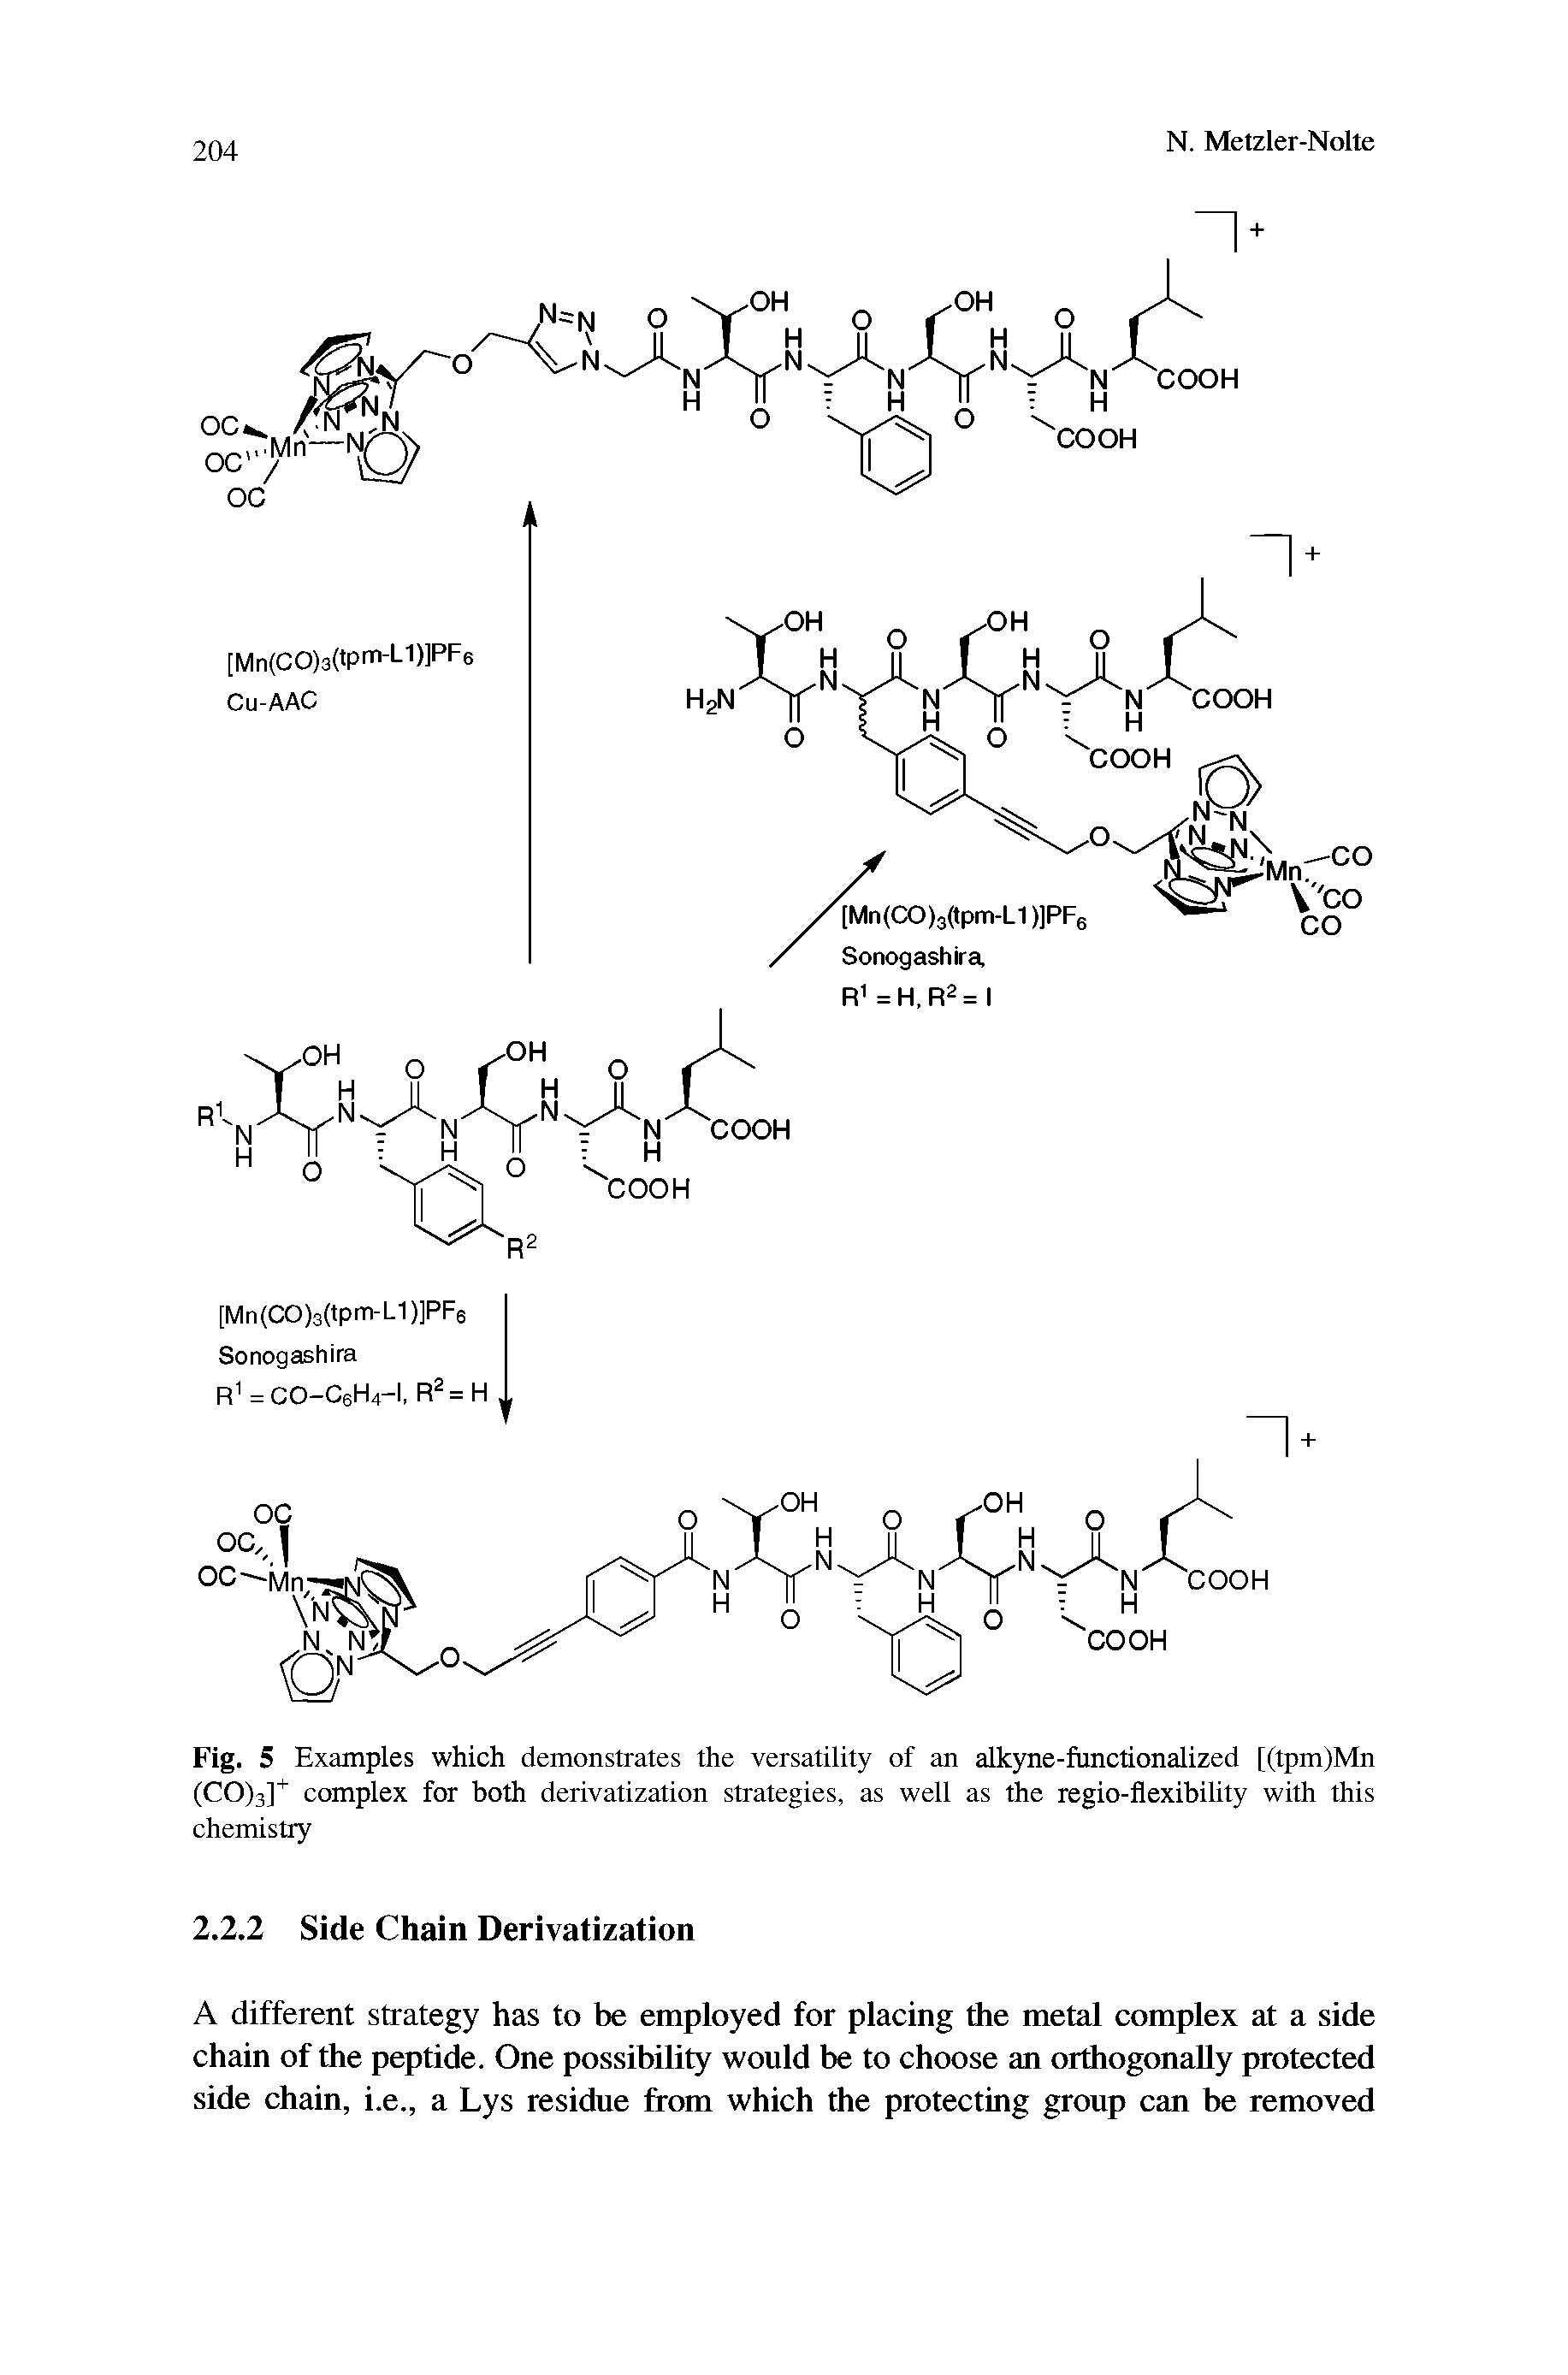 Fig. 5 Examples which demonstrates the versatility of an alkyne-functionalized [(tpm)Mn (CO)3]+ complex for both derivatization strategies, as well as the regio-flexibility with this chemistry...